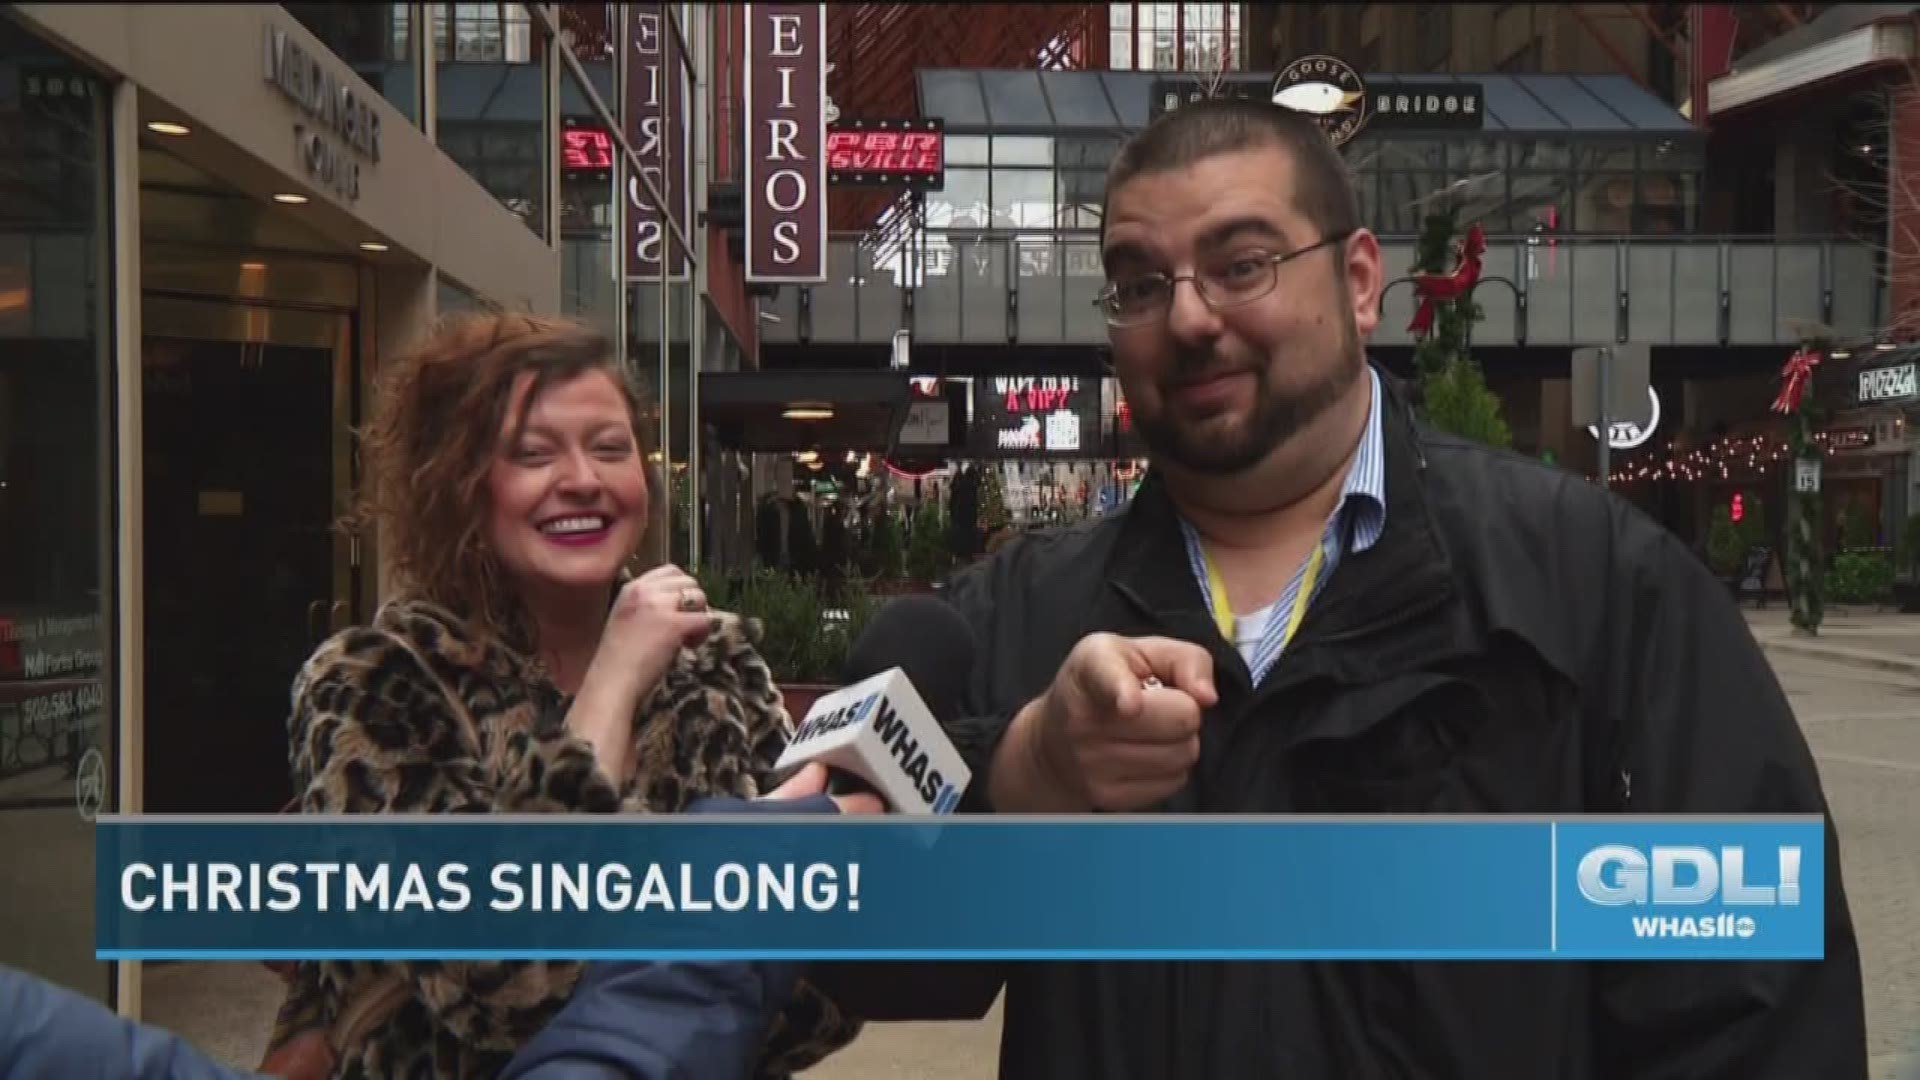 Great Day Live hit the streets of downtown Louisville to ask people what their favorite Christmas song is and if they'd be willing to sing a little of it.